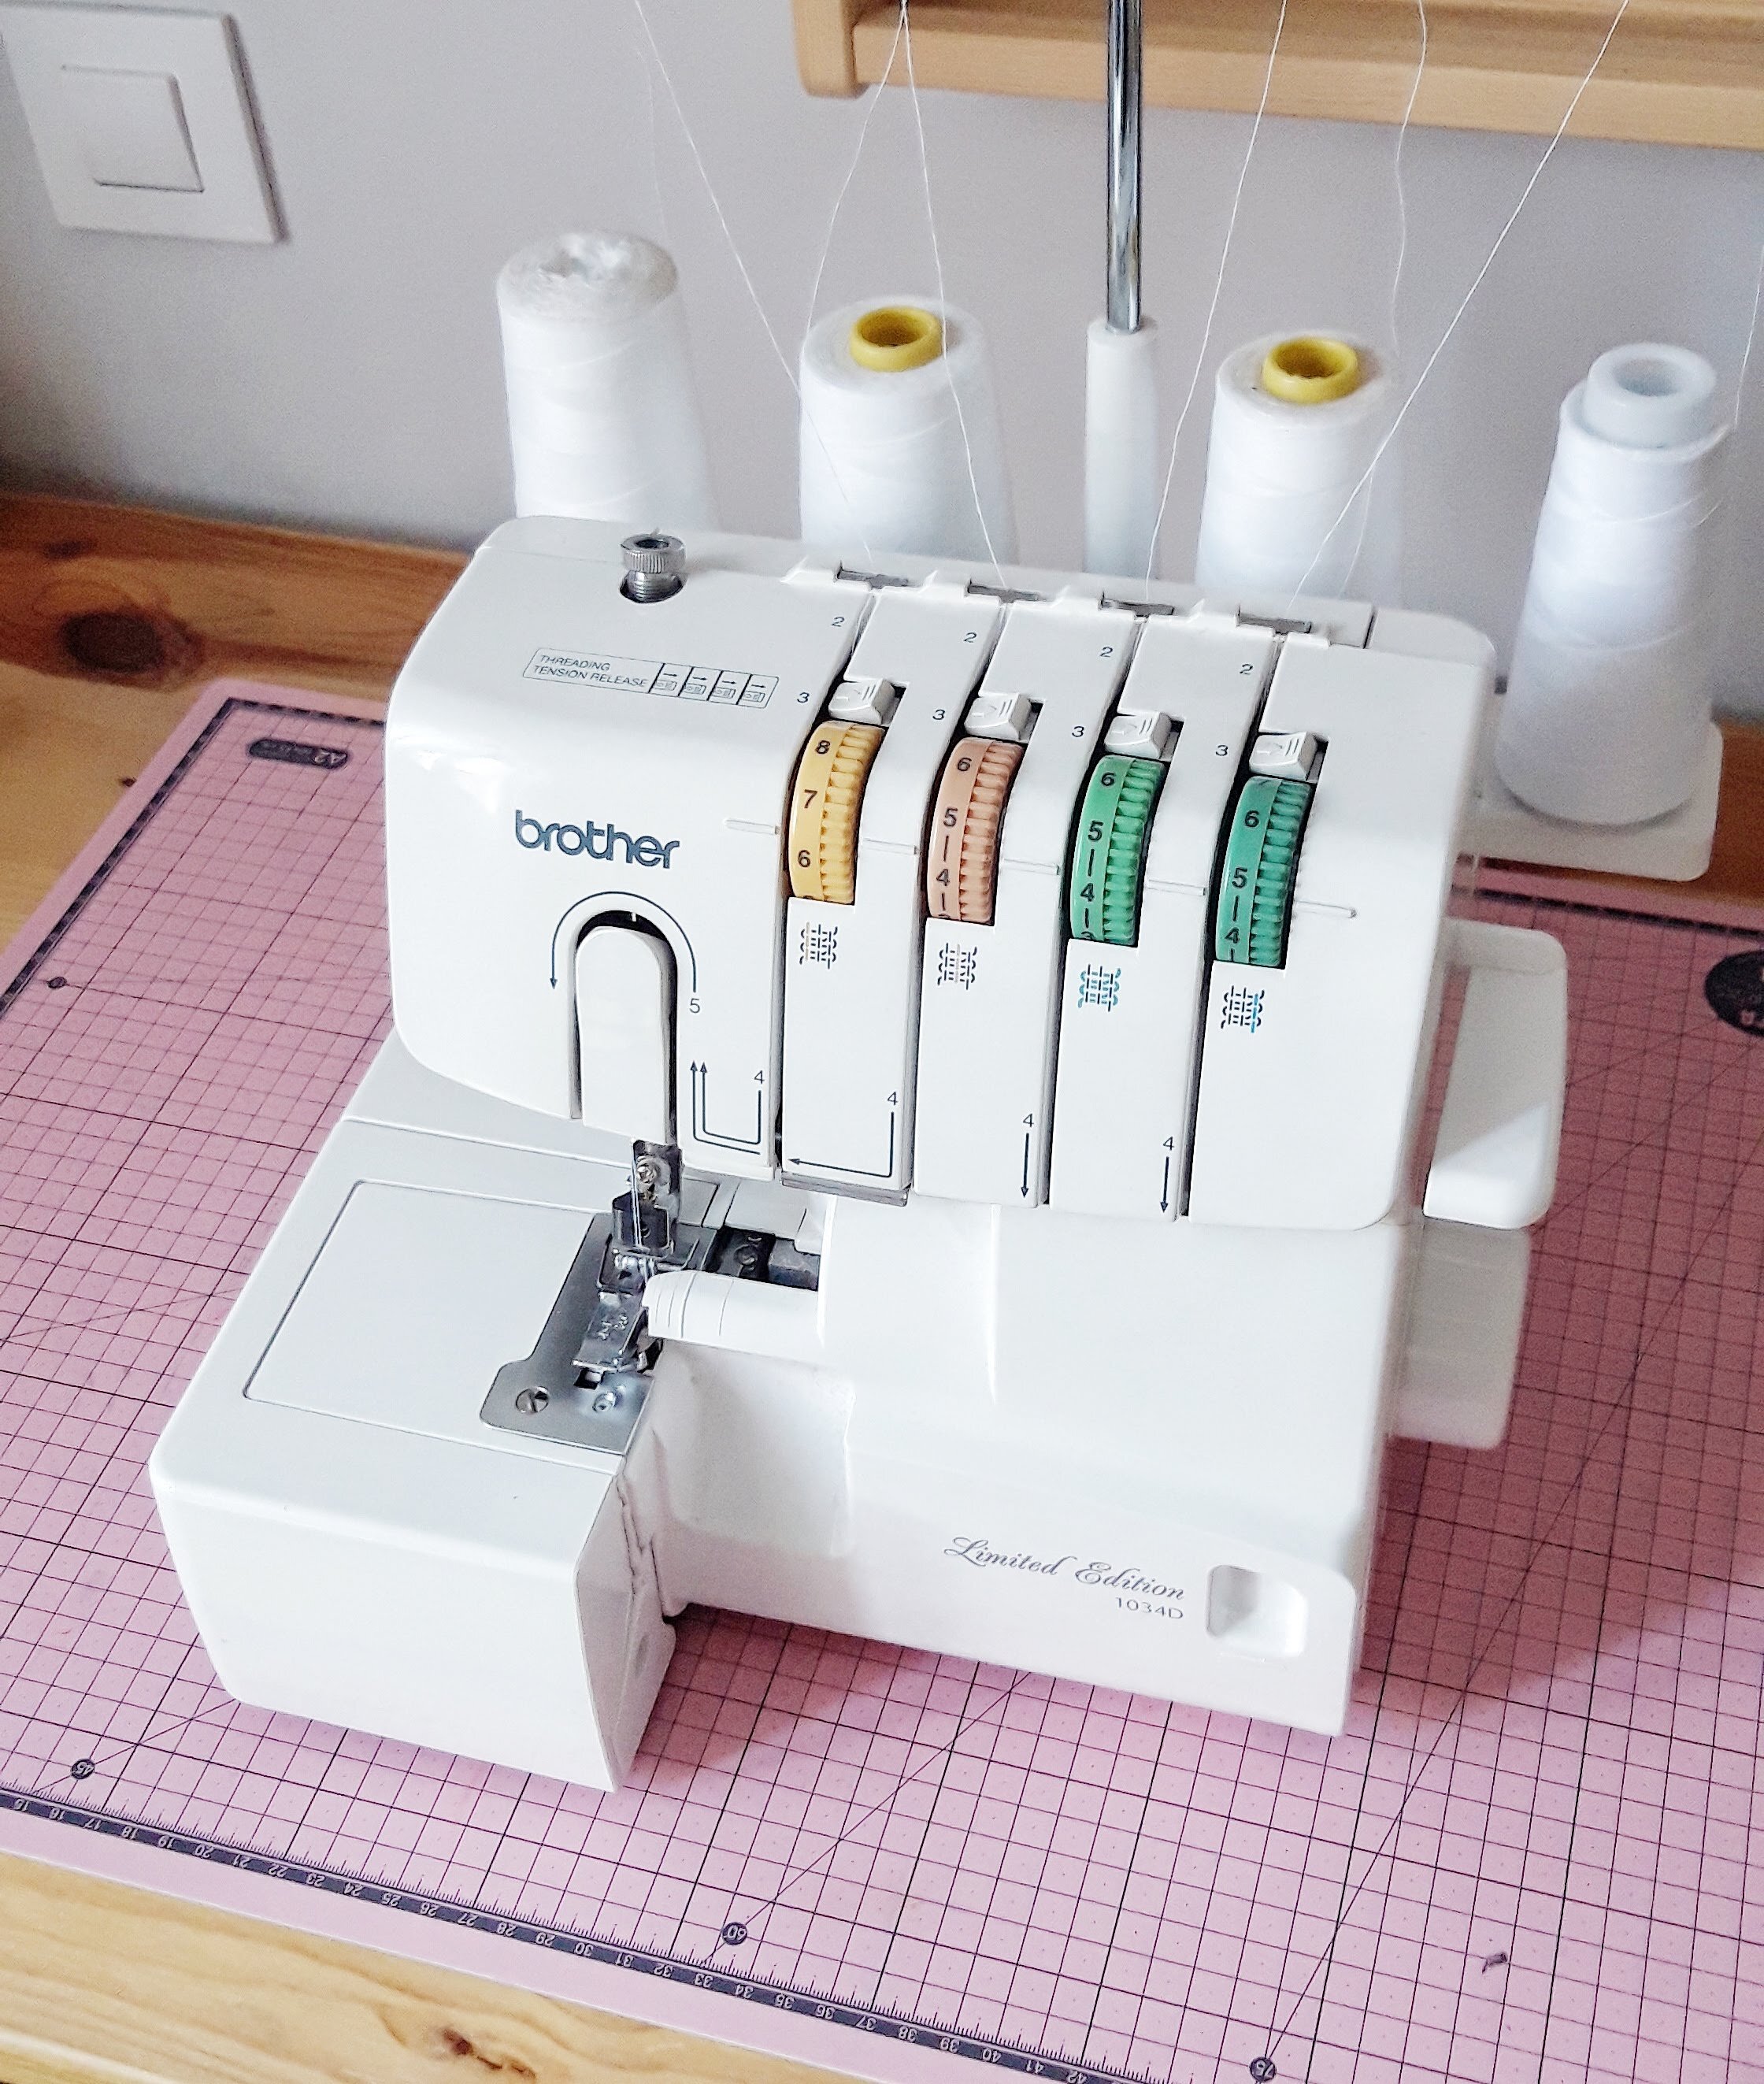 I'm new to sewing & I'm deciding between these two machines, which